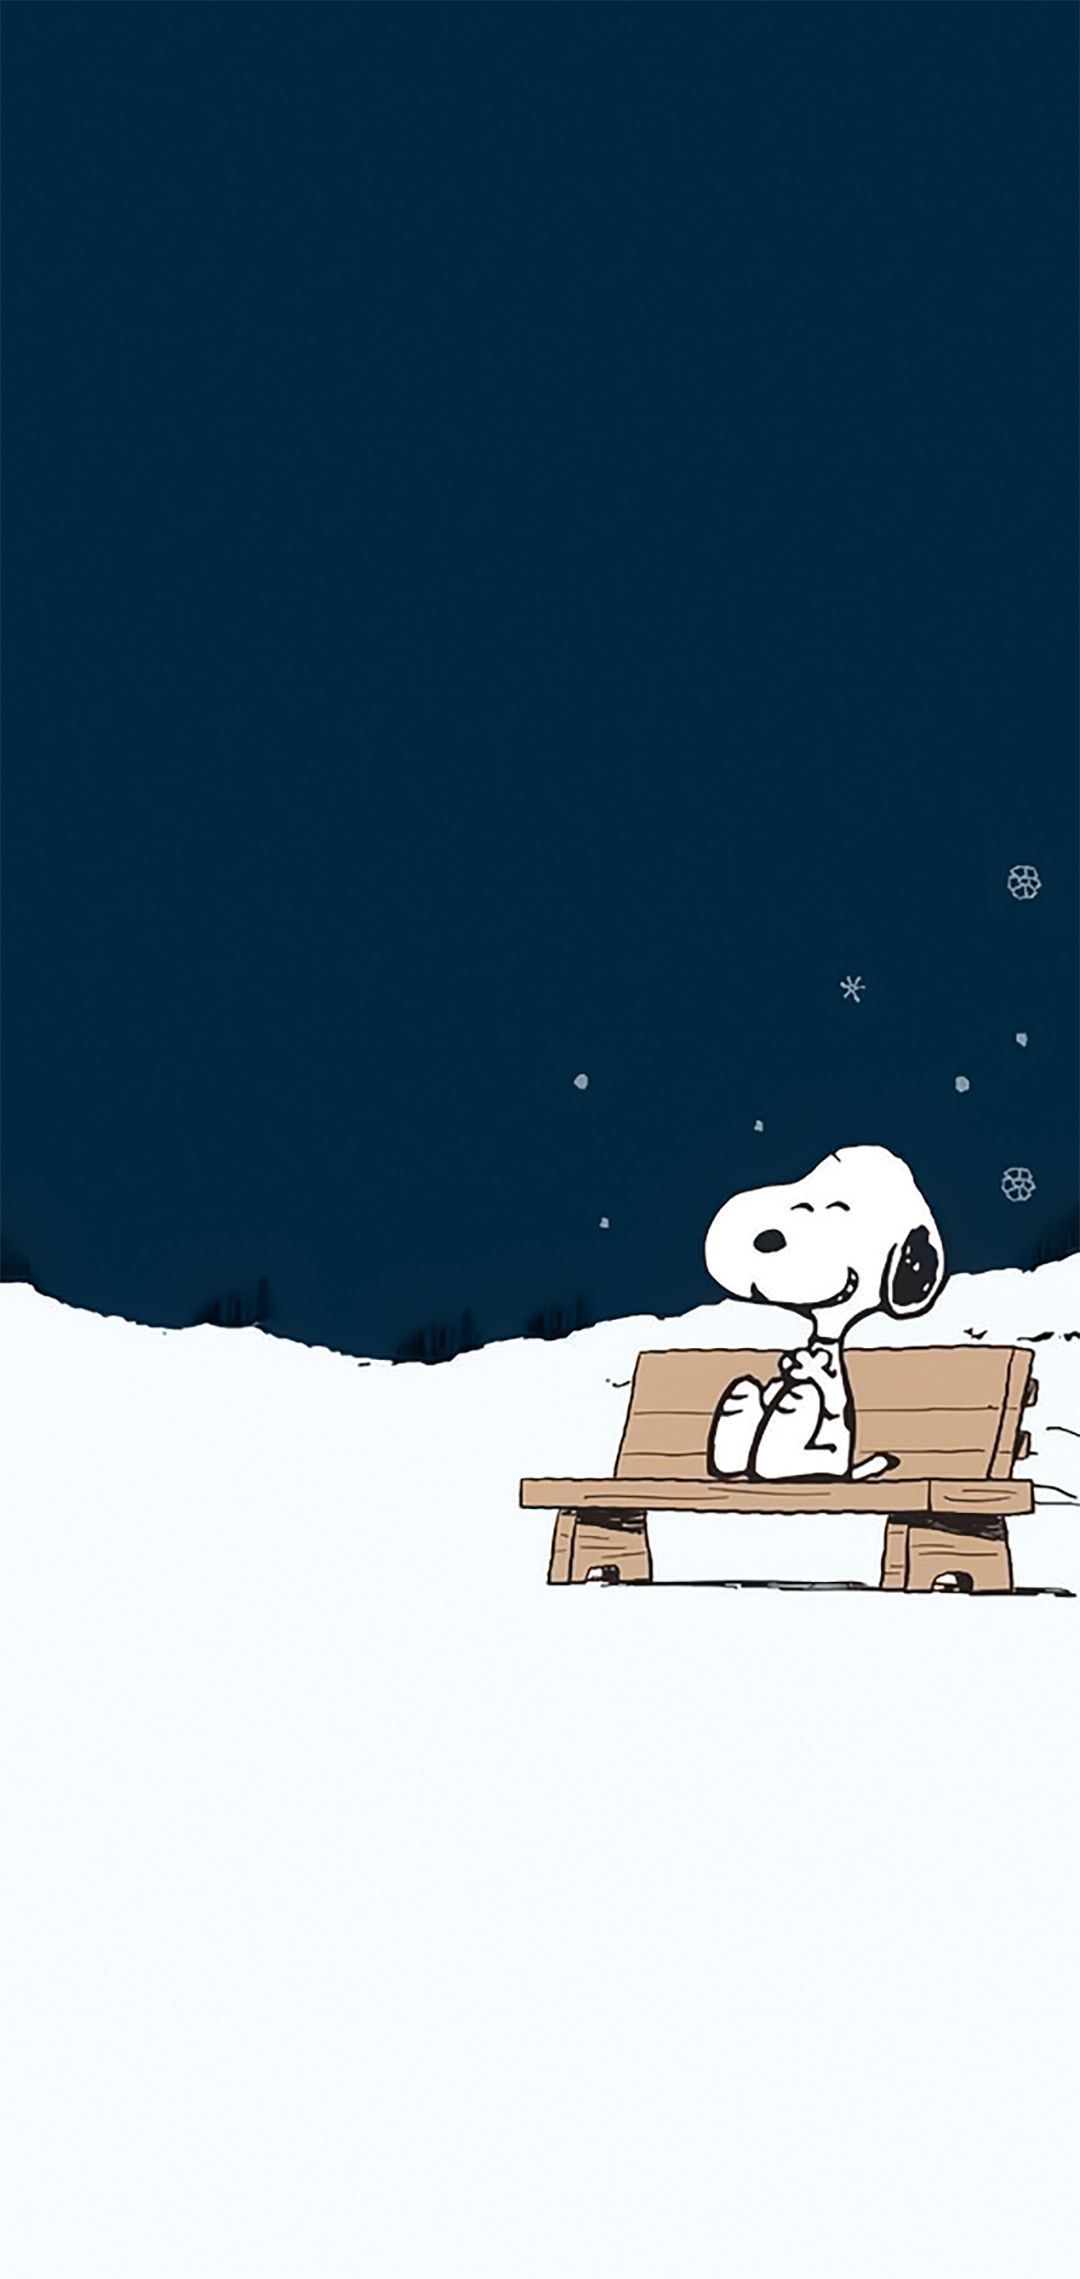 Snoopy sitting on a bench in the snow - Charlie Brown